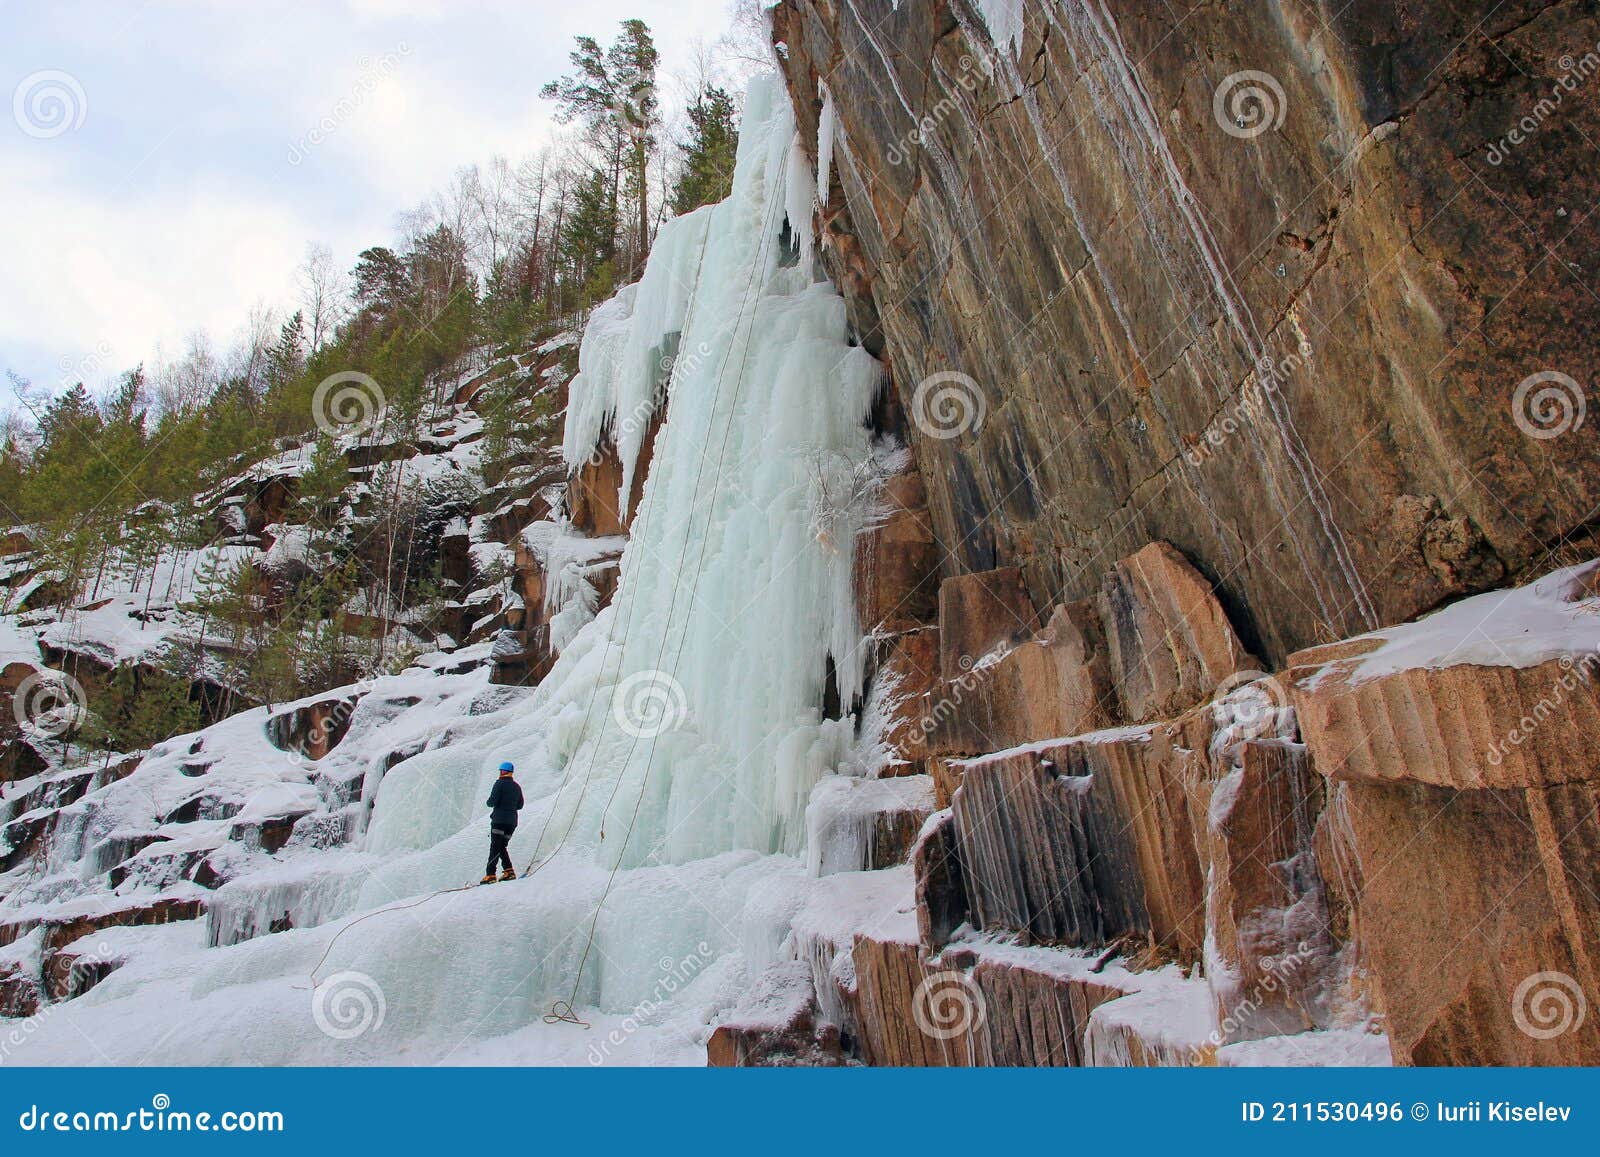 Climber Training on a Frozen Waterfall. Stolby Nature Reserve